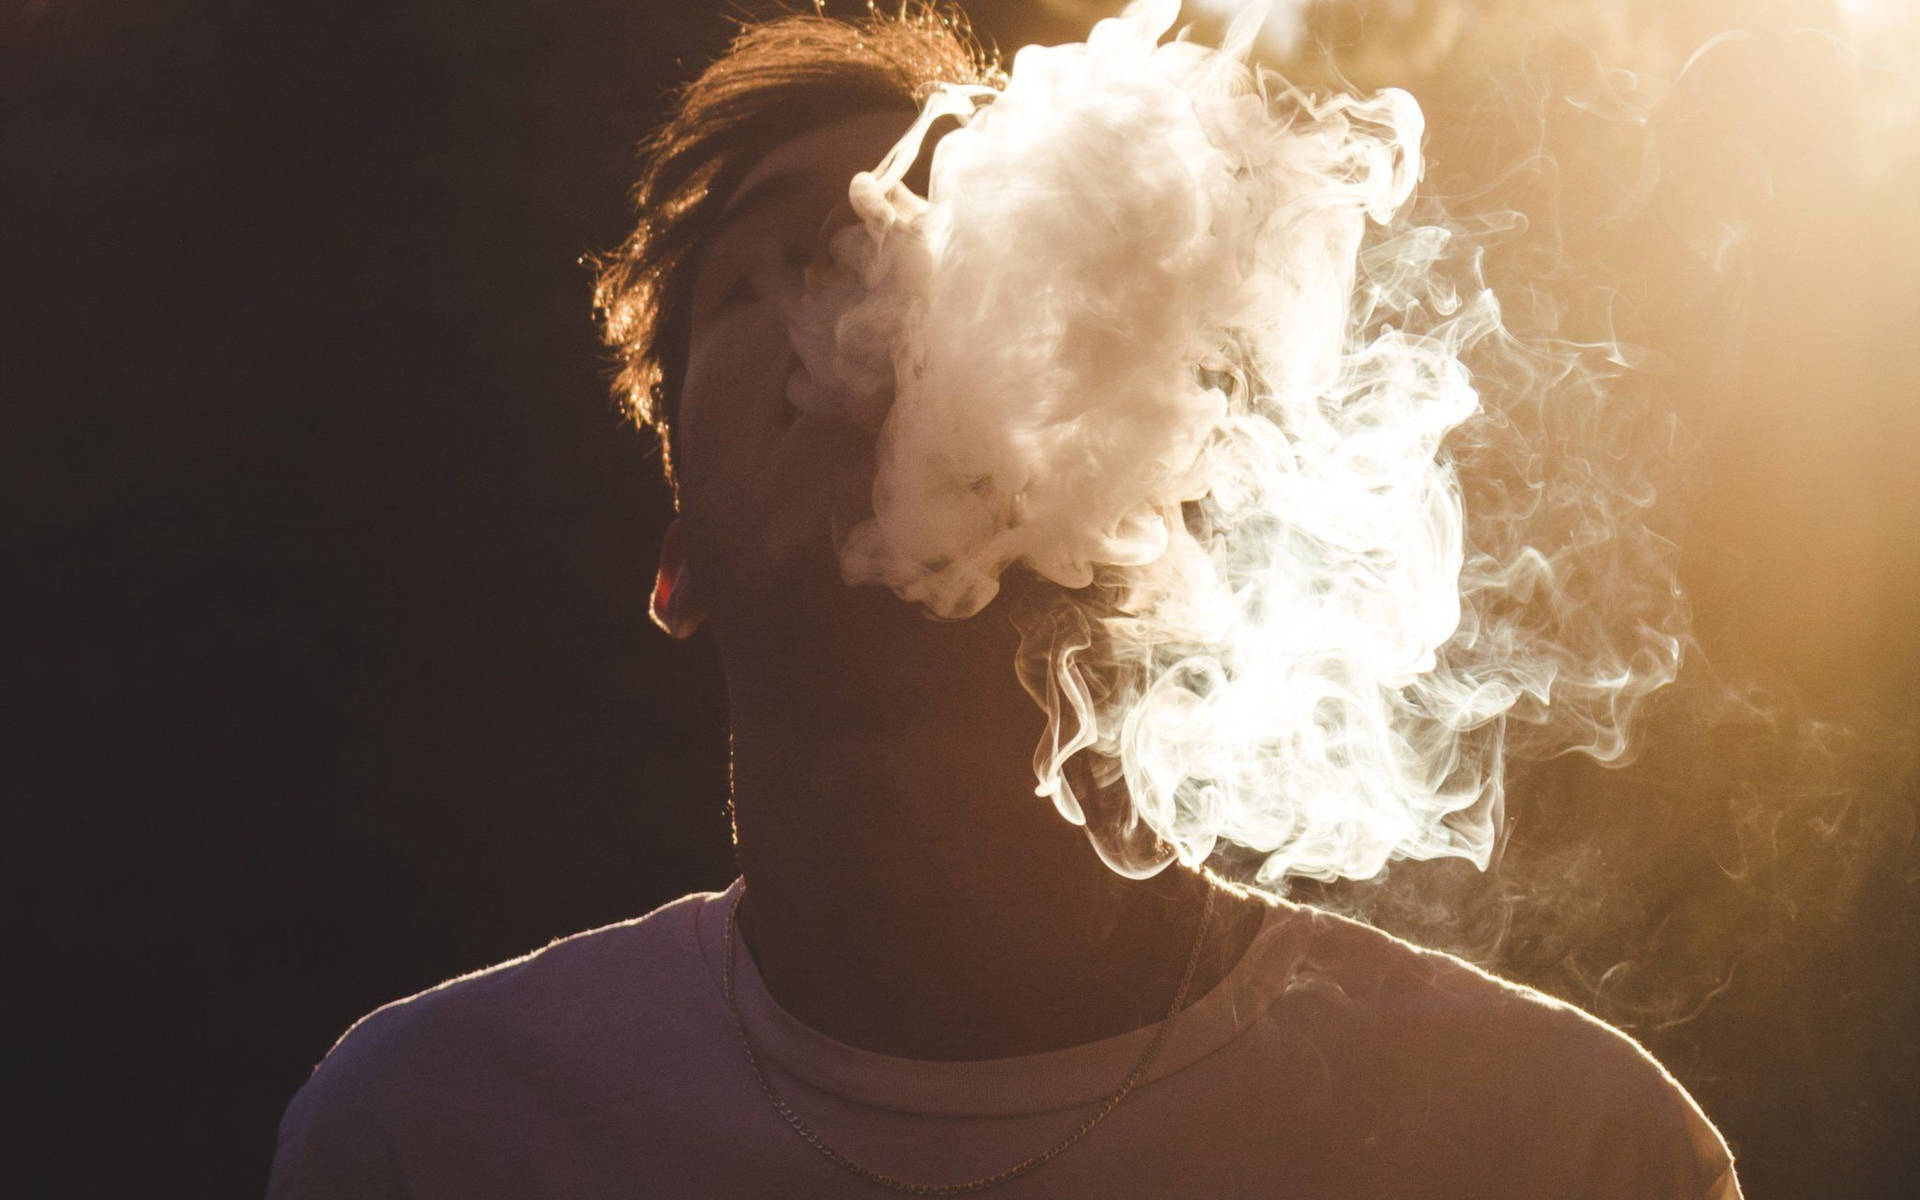 Boy Getting High From Smoking Weed Background